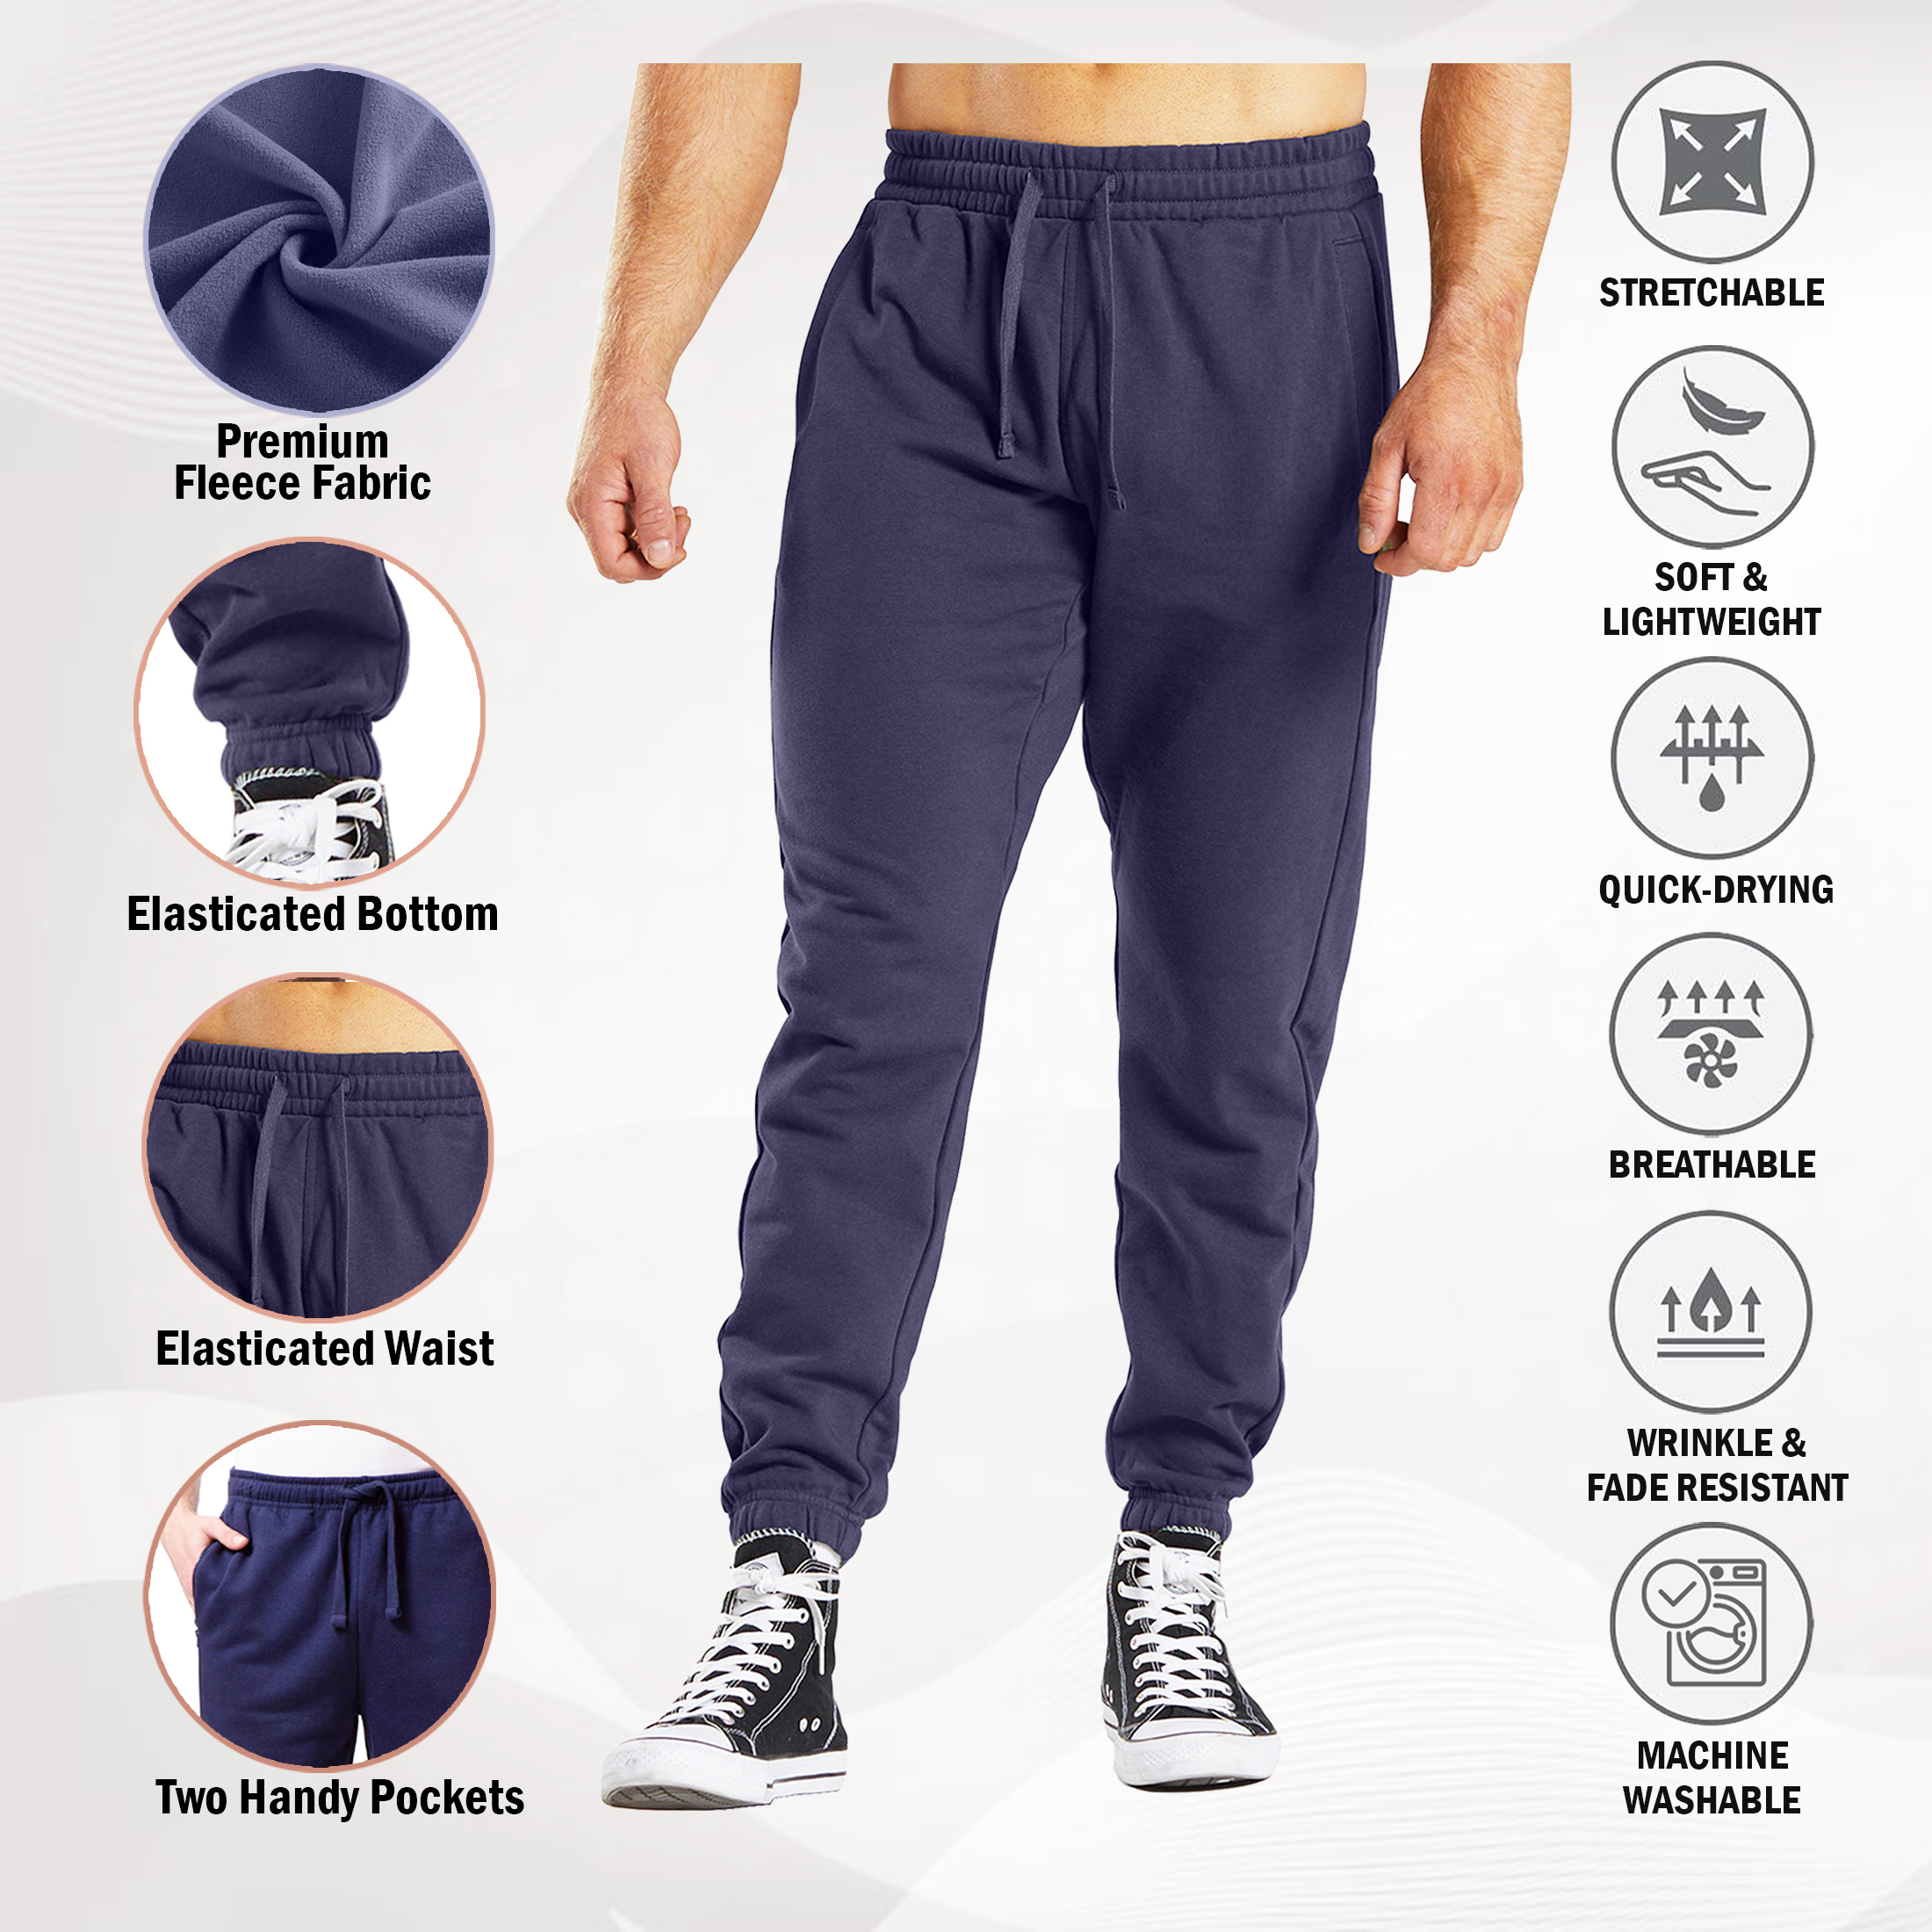 3-Pack: Men's Casual Fleece-Lined Elastic Bottom Sweatpants Jogger Pants With Pockets - Stripes, X-Large